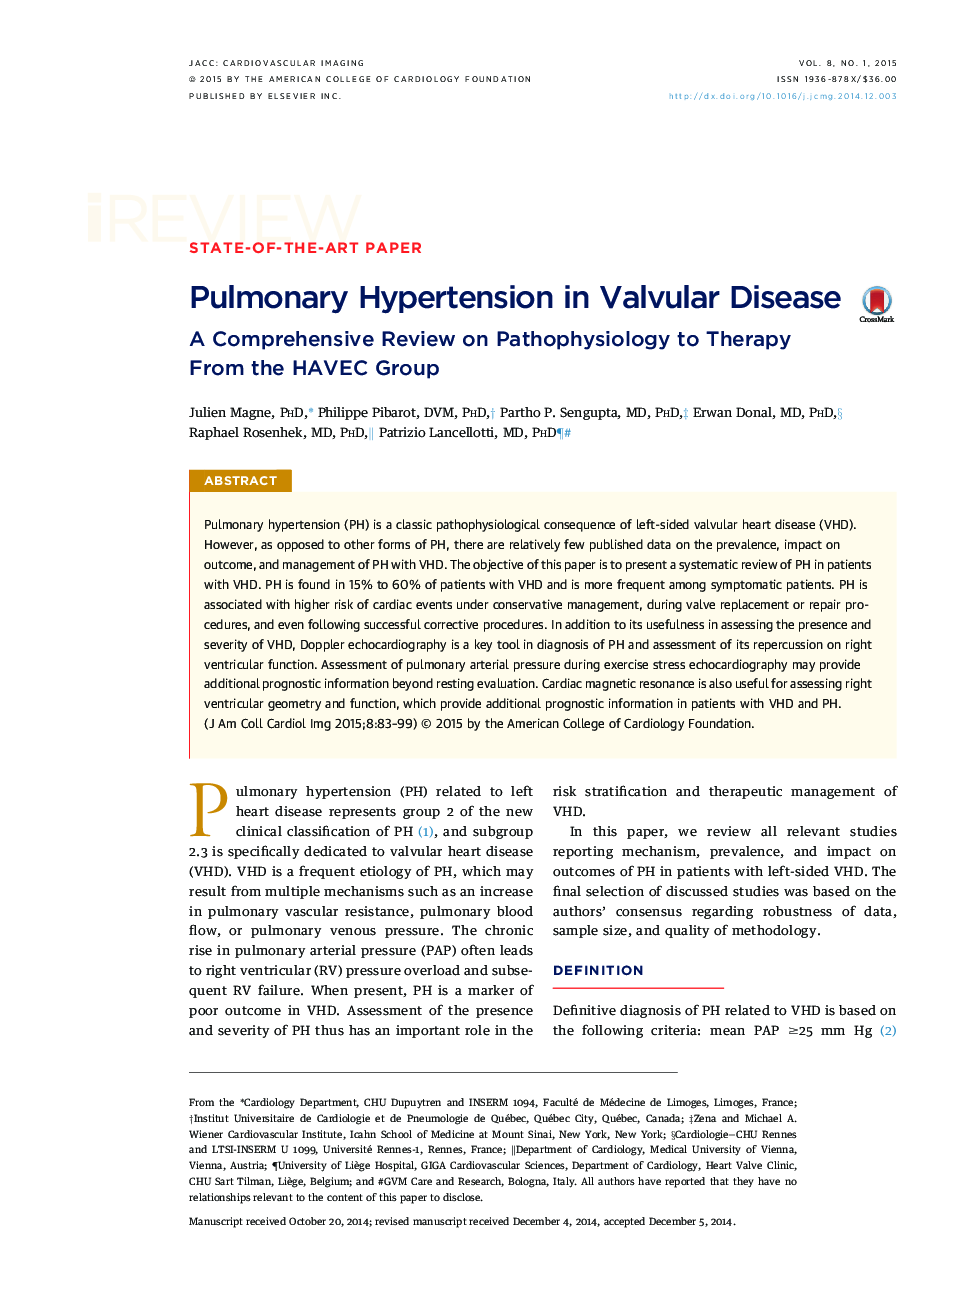 Pulmonary Hypertension in Valvular Disease: A Comprehensive Review on Pathophysiology to Therapy From the HAVEC Group